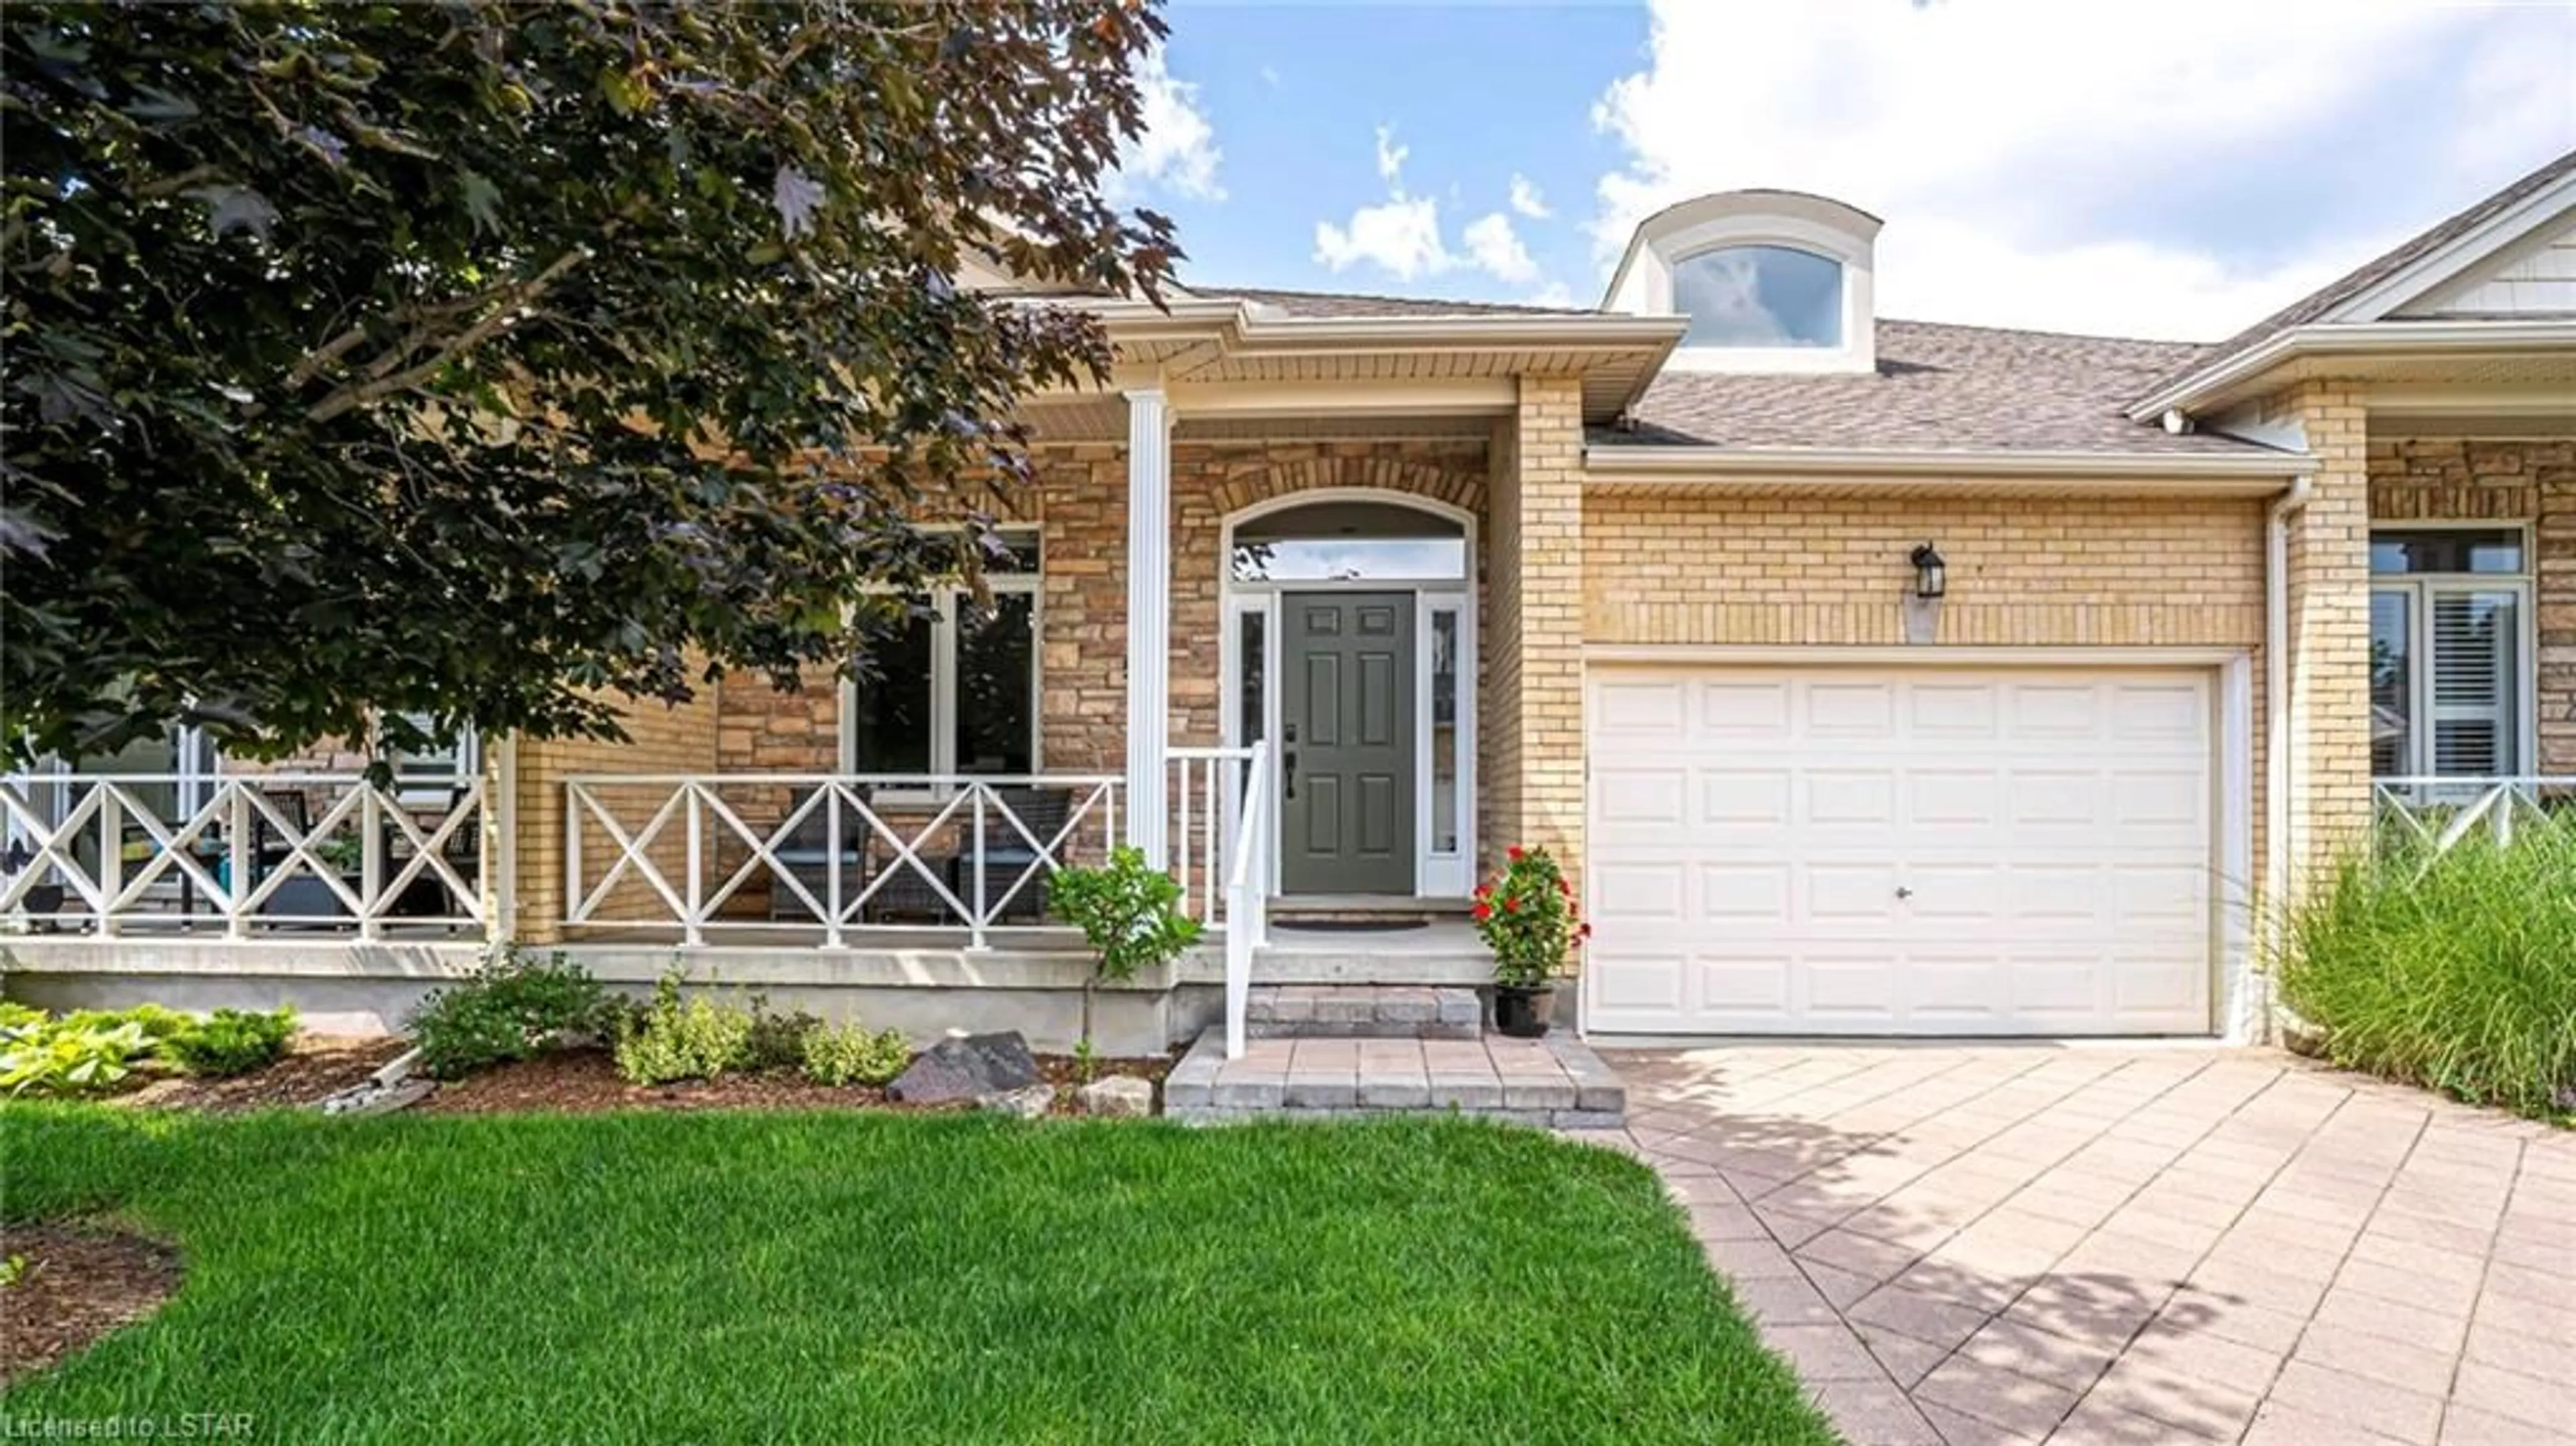 Home with brick exterior material for 947 Adirondack Rd #9, London Ontario N6K 4Y7